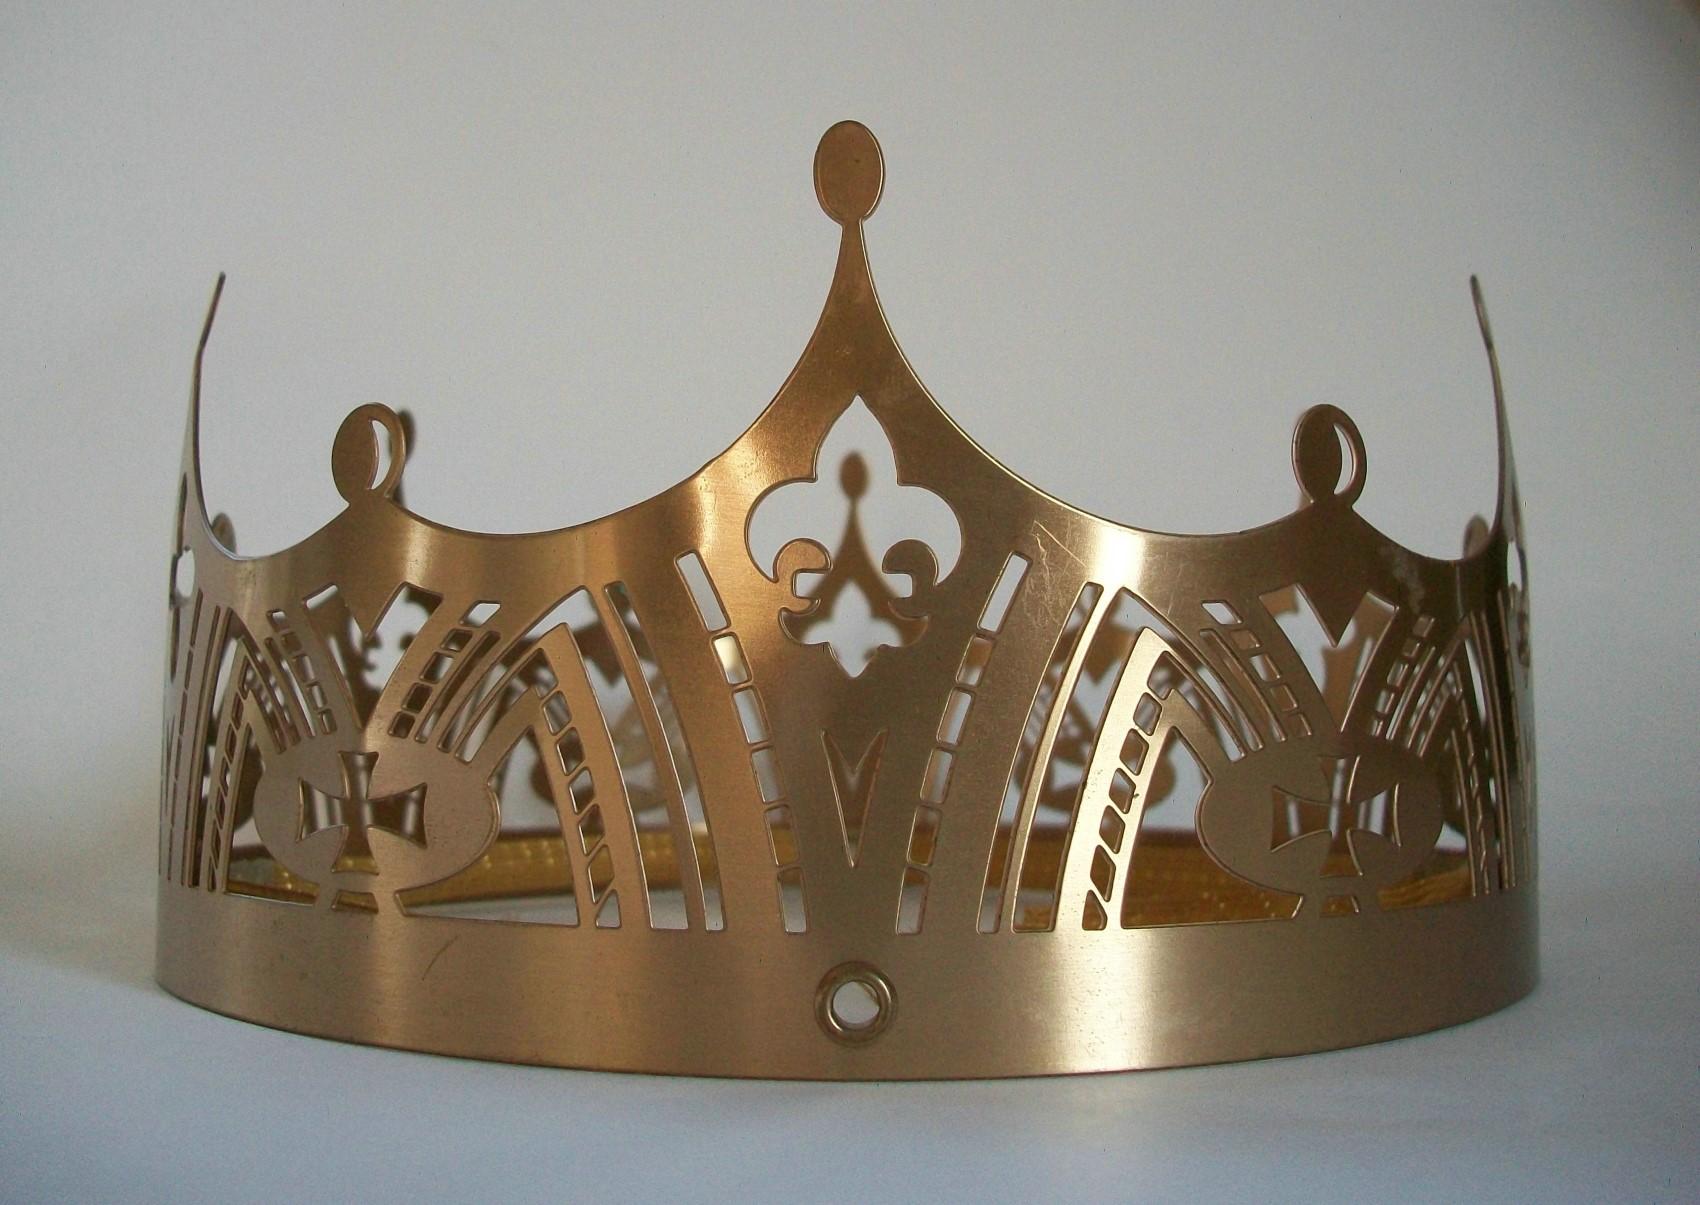 European French Gothic Revival Style Pierced Metal Crown, Europe, Late 20th Century For Sale